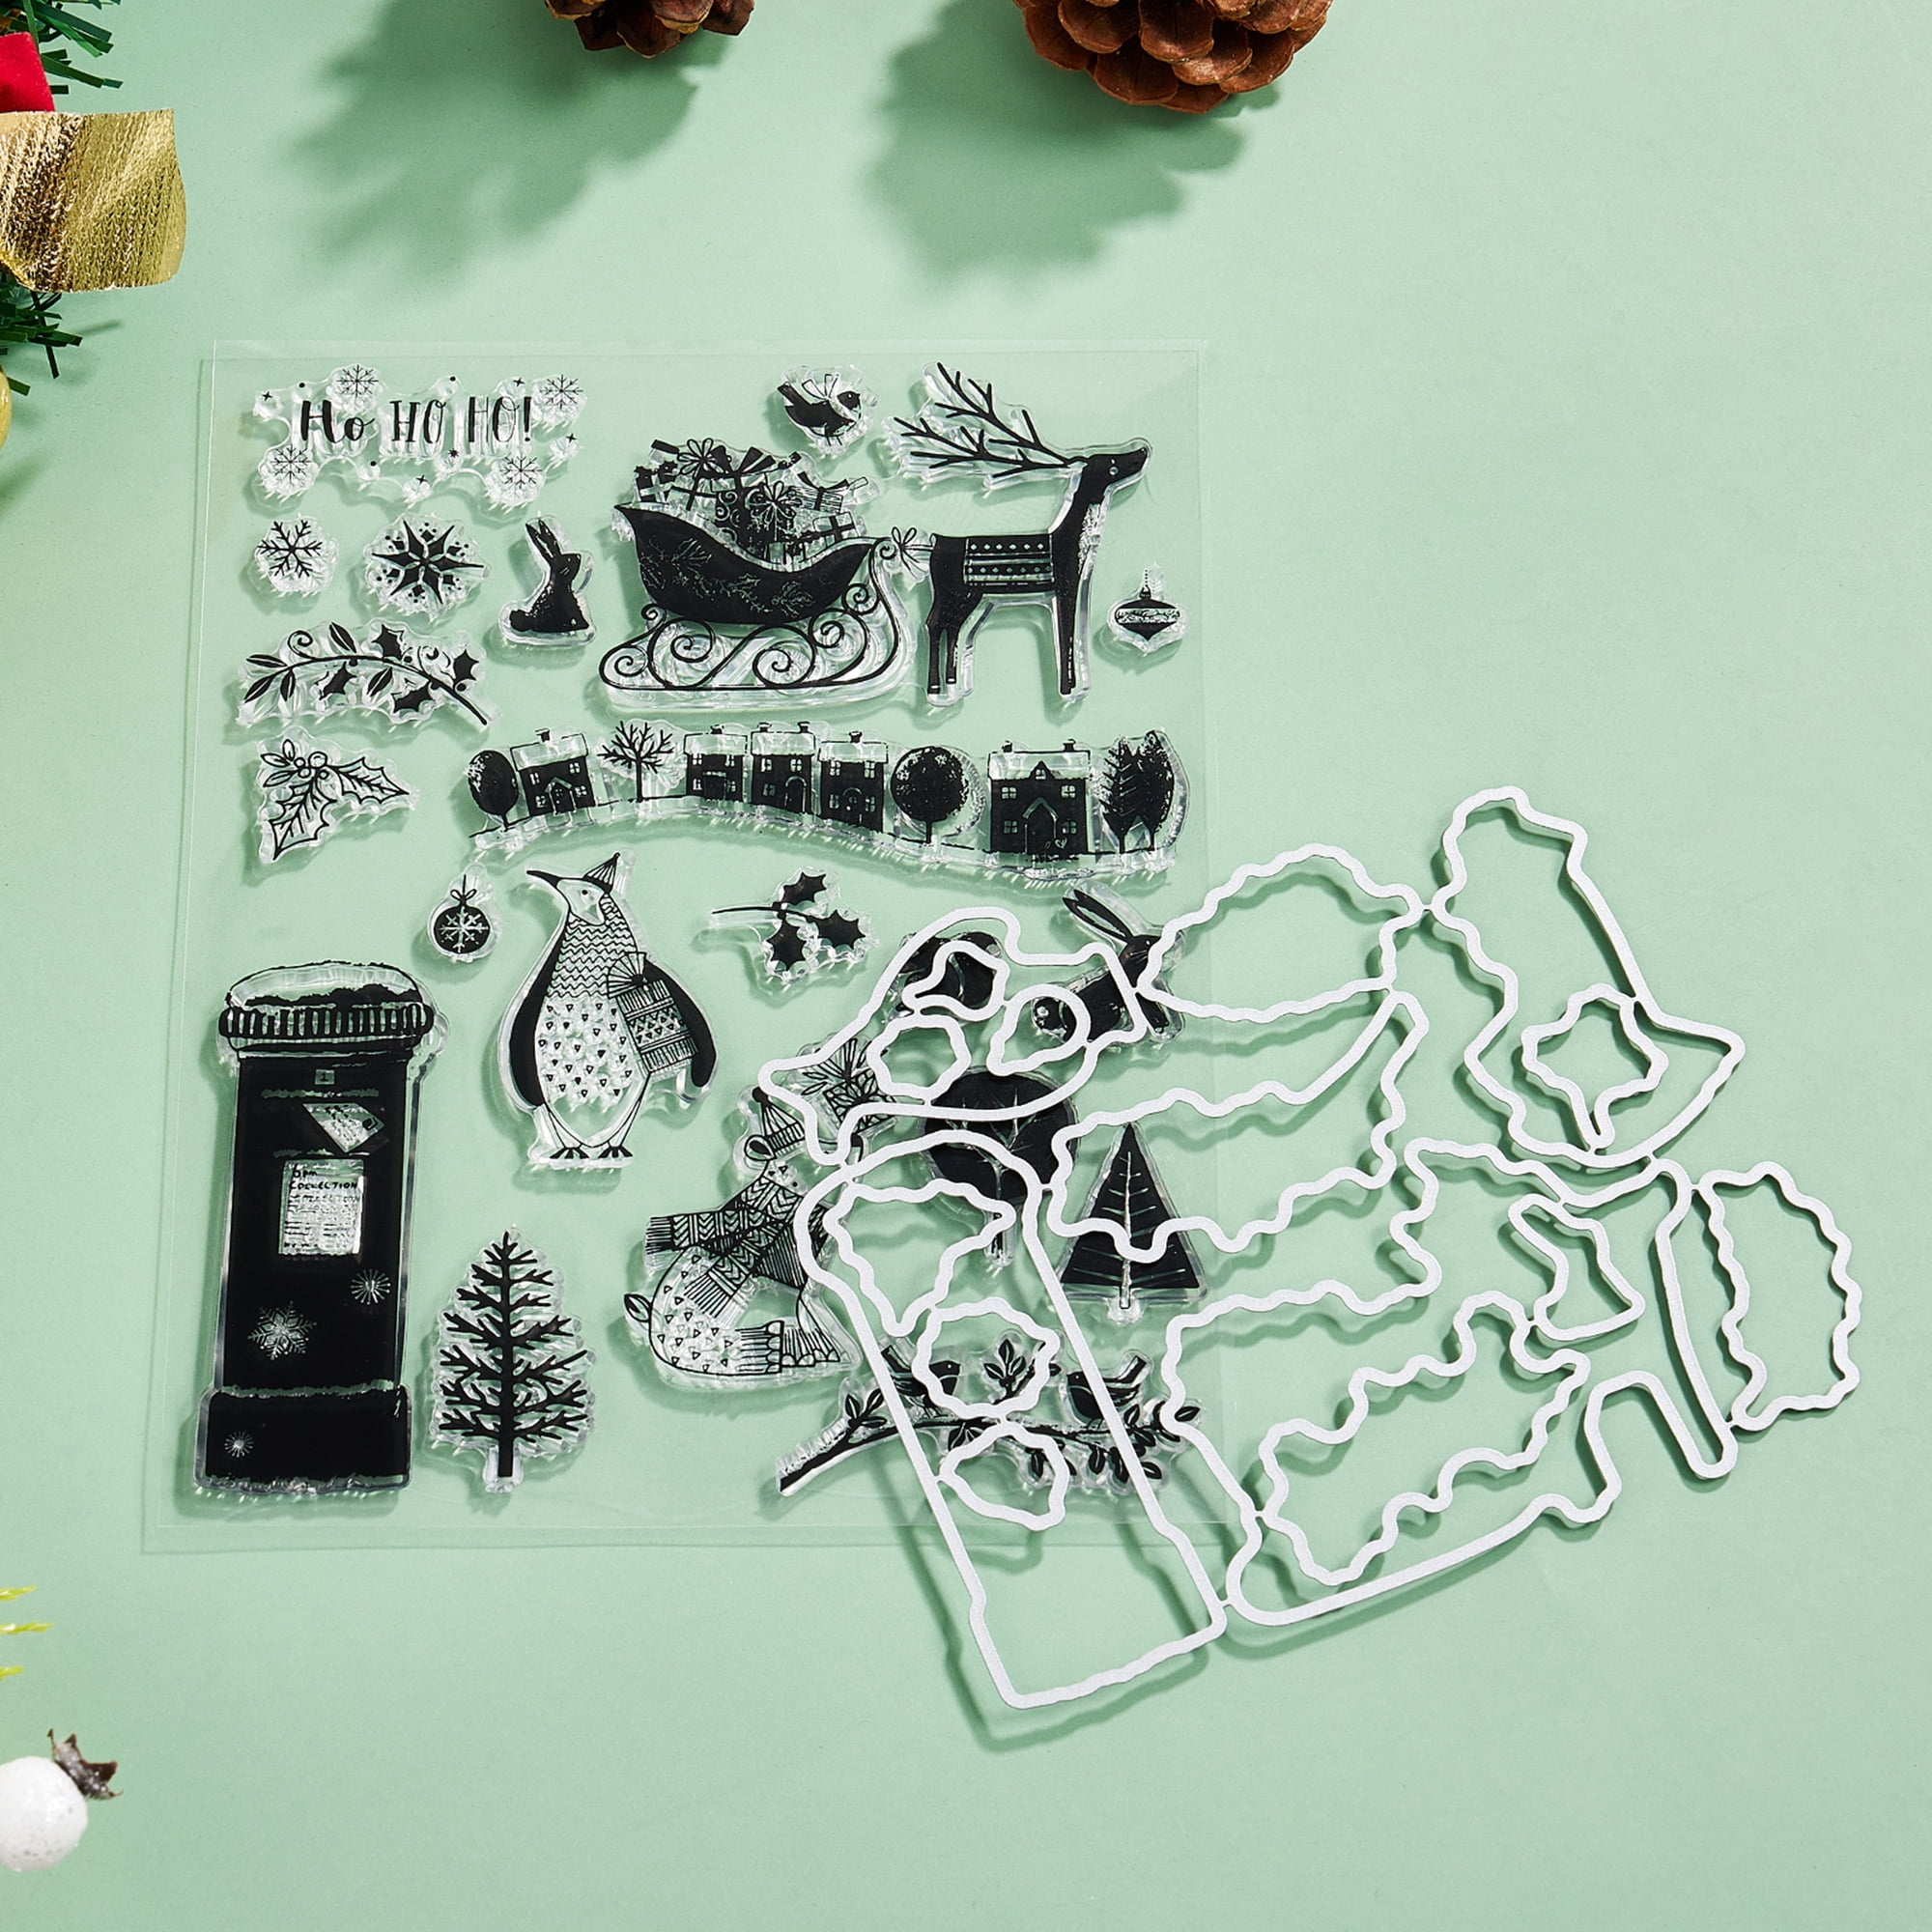  Lapoo Stamps and Dies for Card Making, Christmas Pine Branches  Snow DIY Scrapbooking Arts Crafts, Metal Cutting Dies Clear Stamps Sets  Arts Gifts for Christmas, Thanksgiving, Halloween (SC003) : Arts